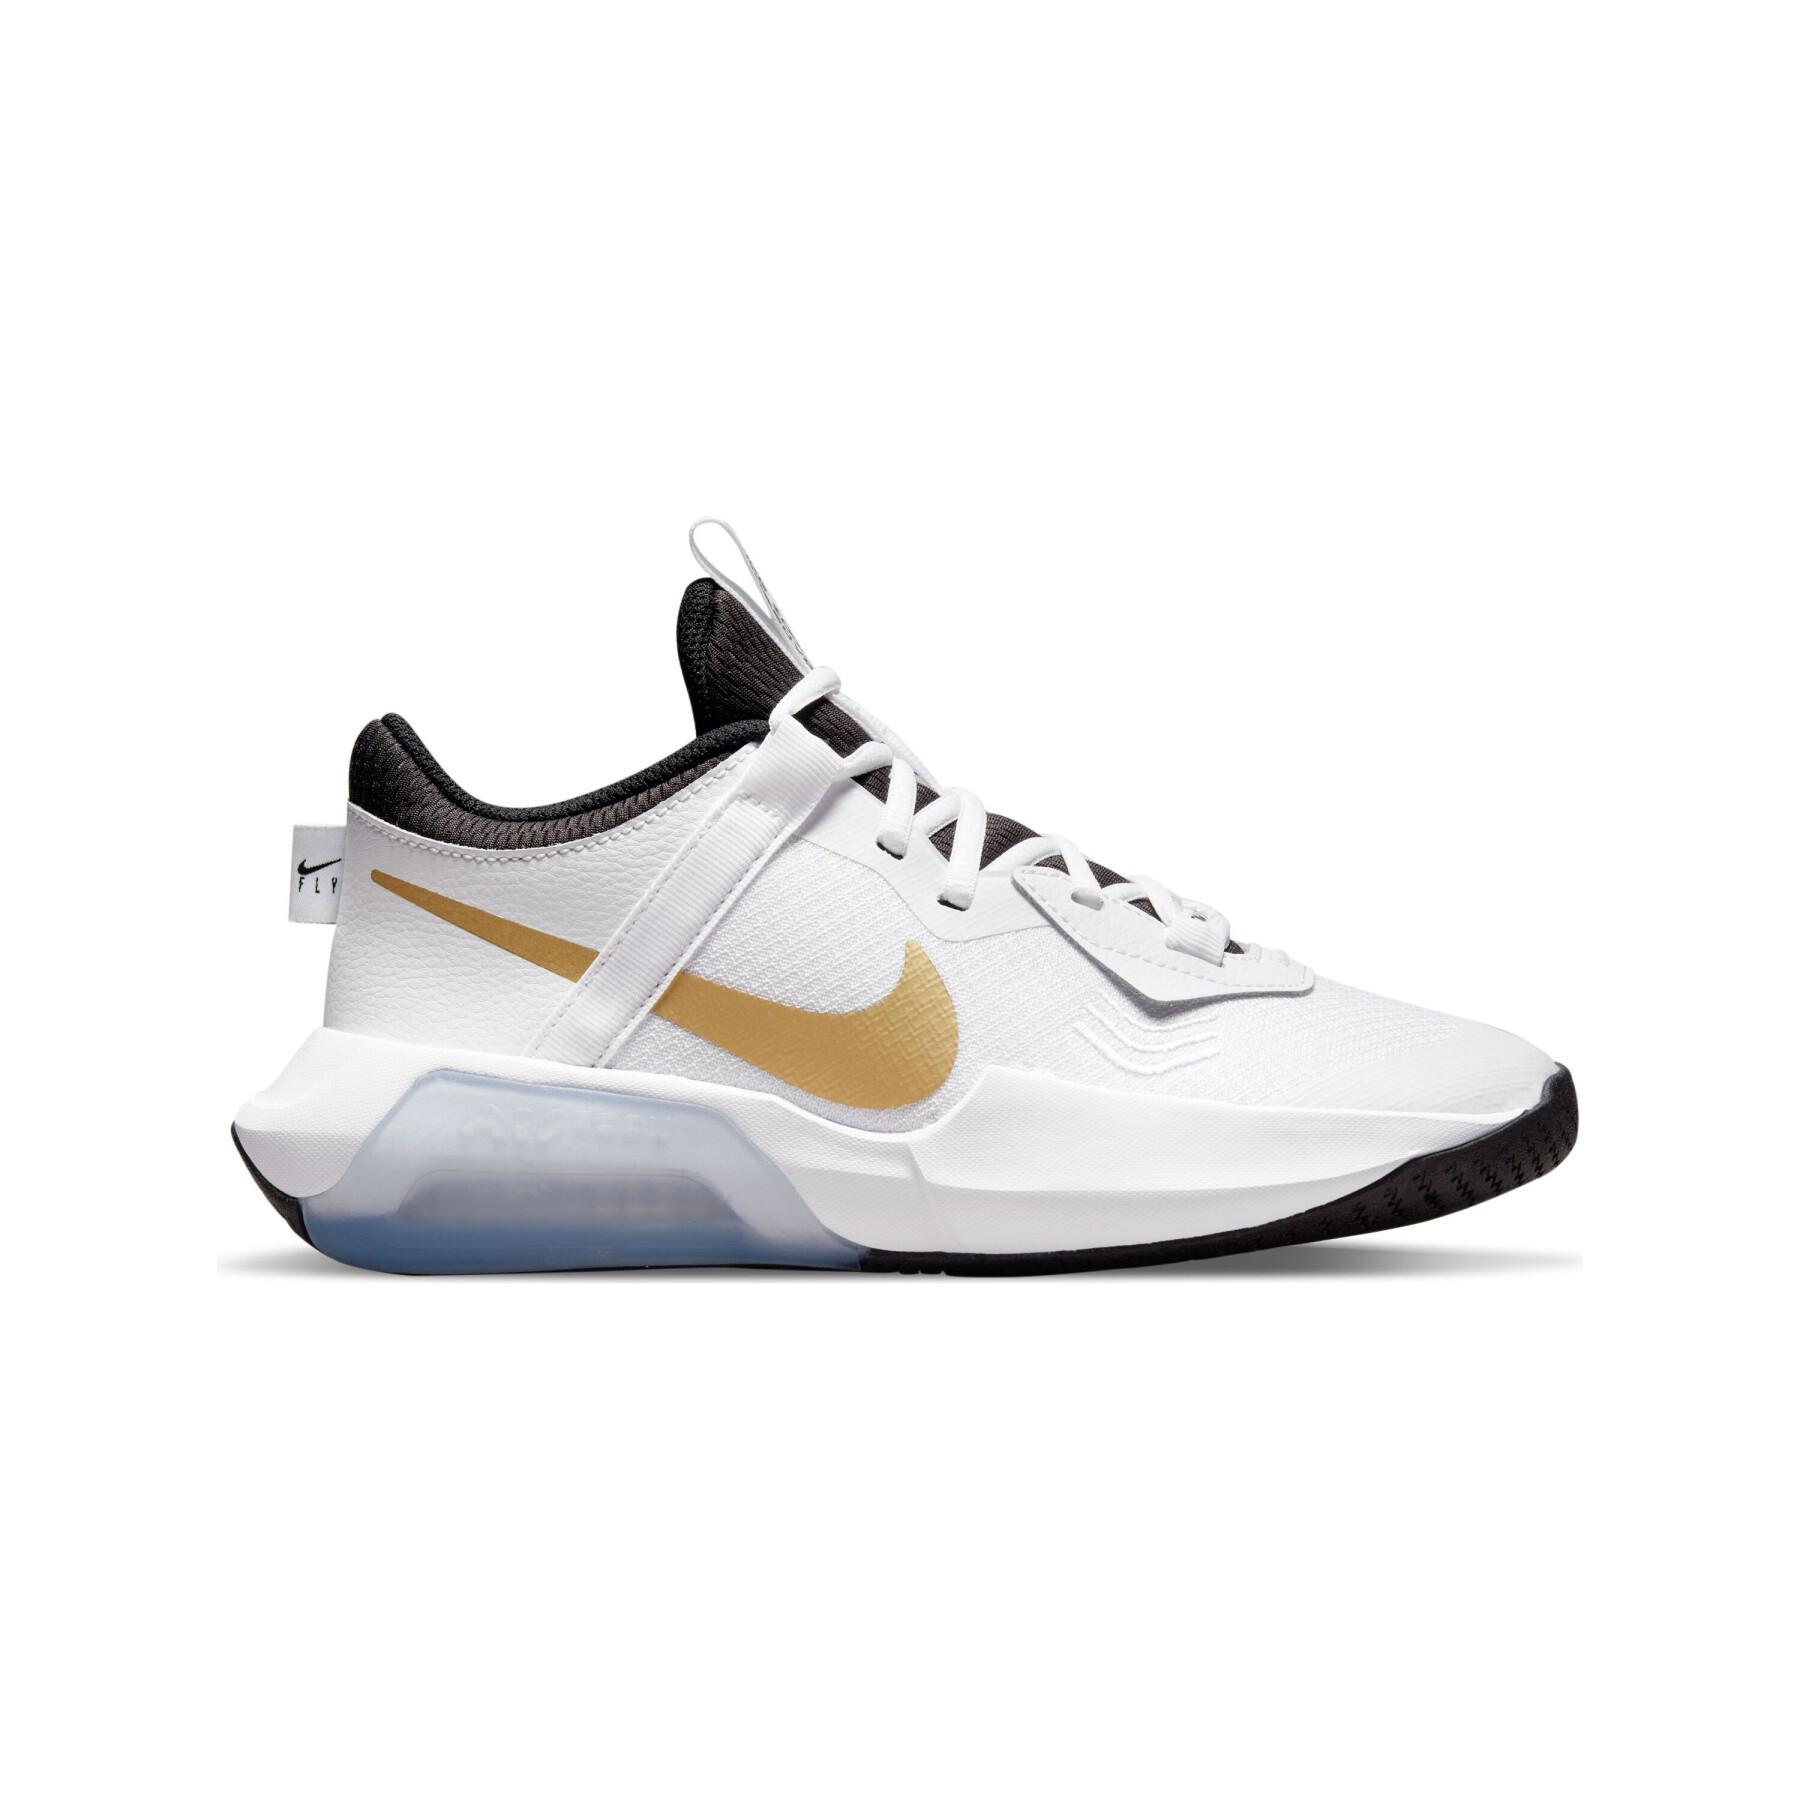 Chaussures indoor enfant Nike Air Zoom Crossover